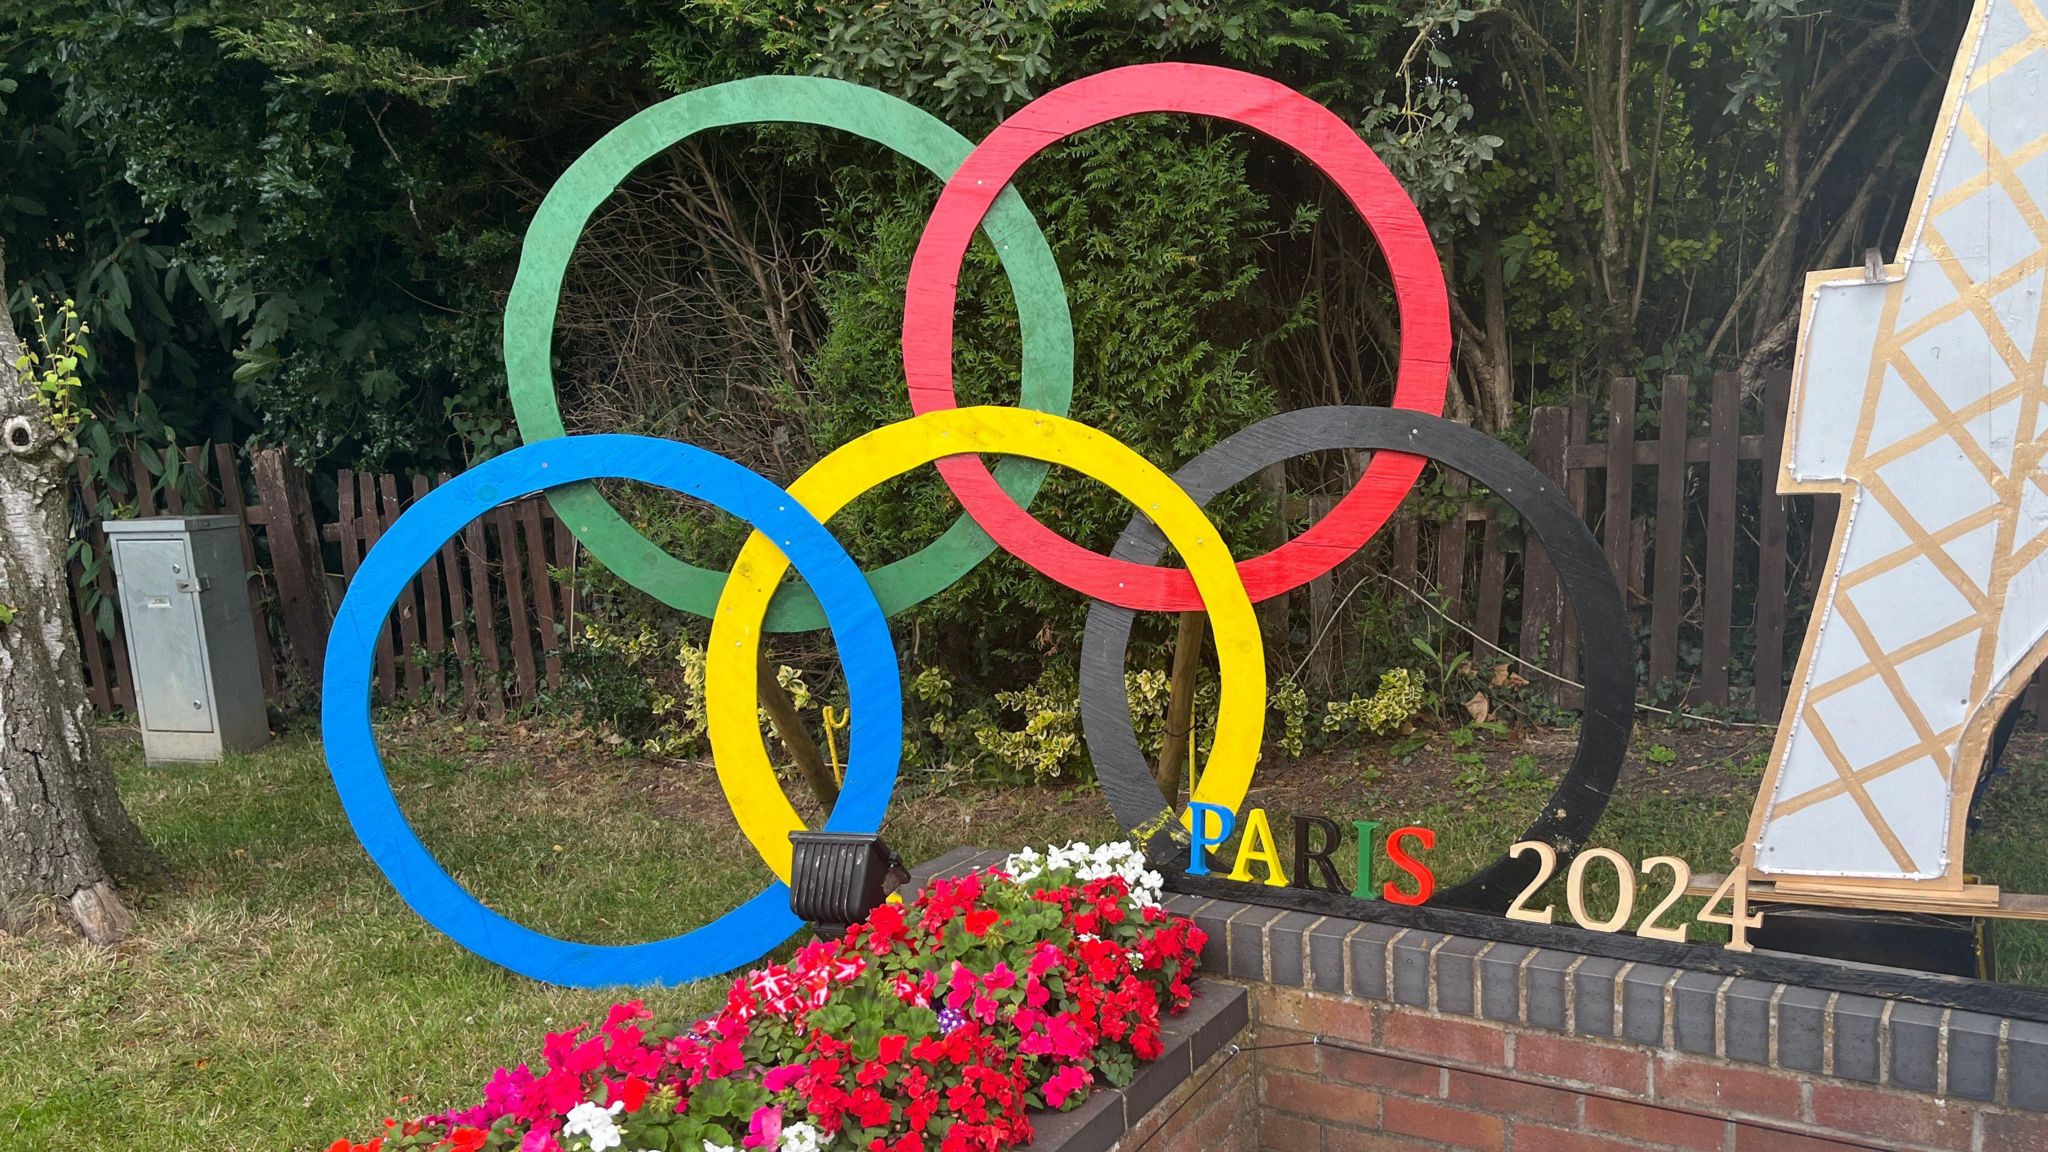 A model of the Olympic rings, sat behind a raised flower bed, with letters and numbers reading Paris 2024 on a wall